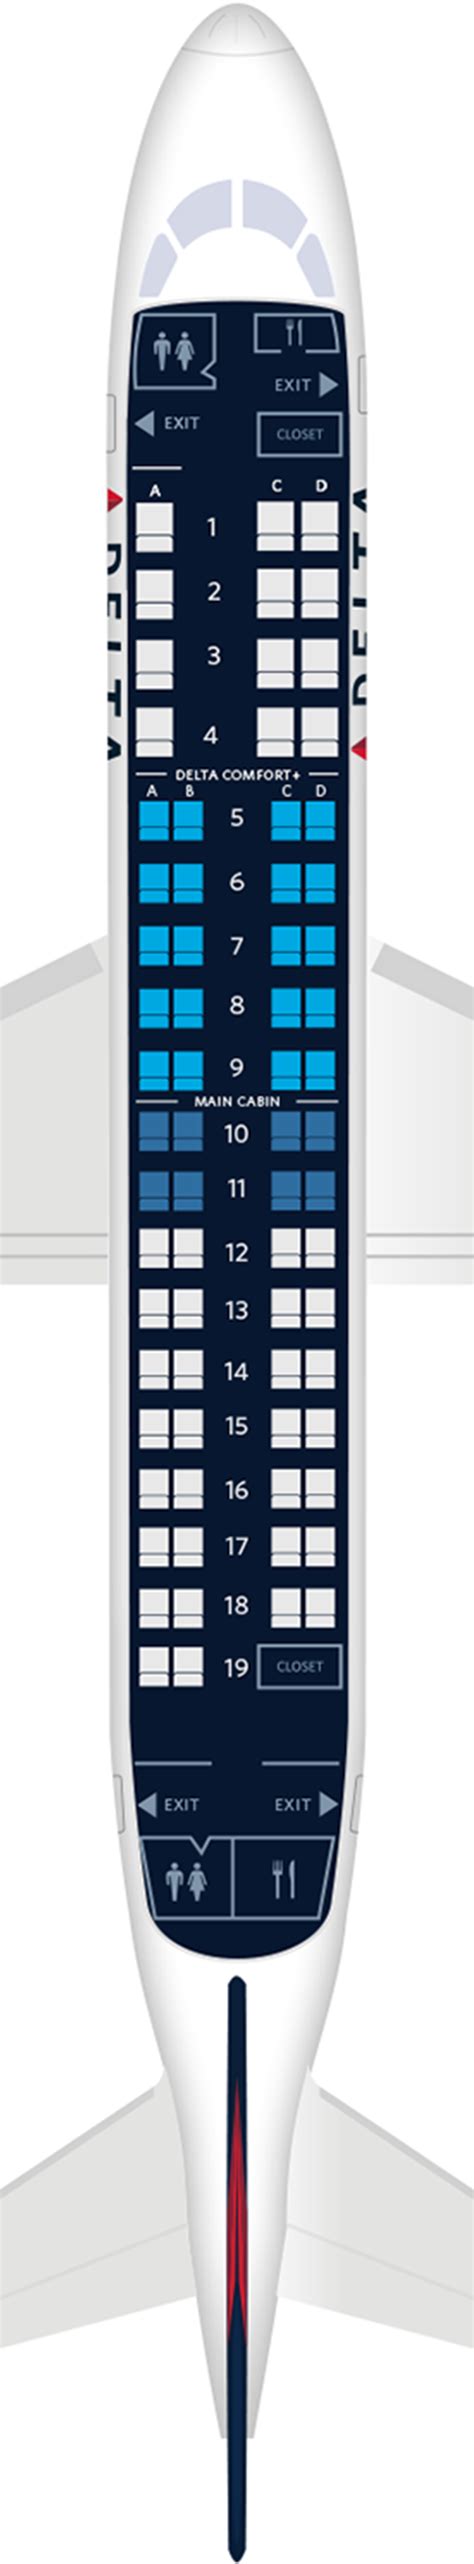 Embraer e 175 seat map. Seating details Seat map key. These aircraft are used on short-haul domestic flights and transborder services. The ERJ-175 is operated by Sky Regional on behalf of Air Canada. This aircraft features personal seat back entertainment. Passengers should bring their own earphones to avoid Air Canada's charge. For your next Air Canada flight, use ... 